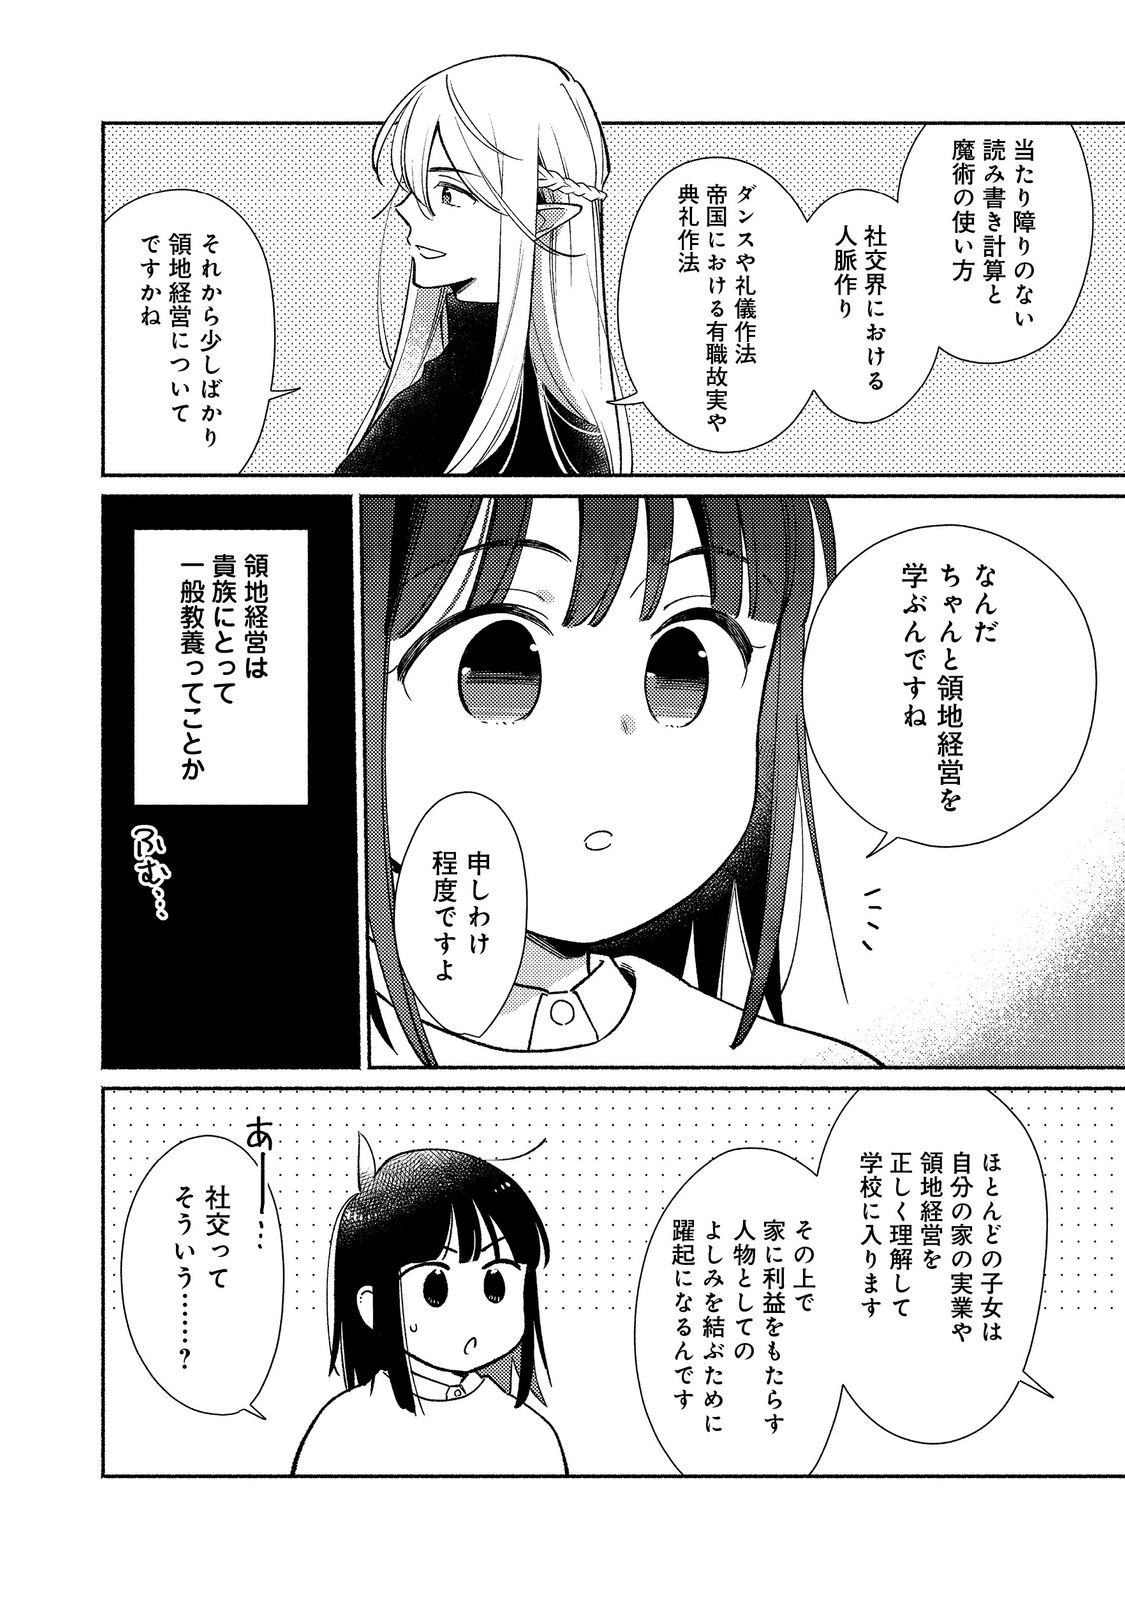 I’m the White Pig Nobleman 第24.2話 - Page 16